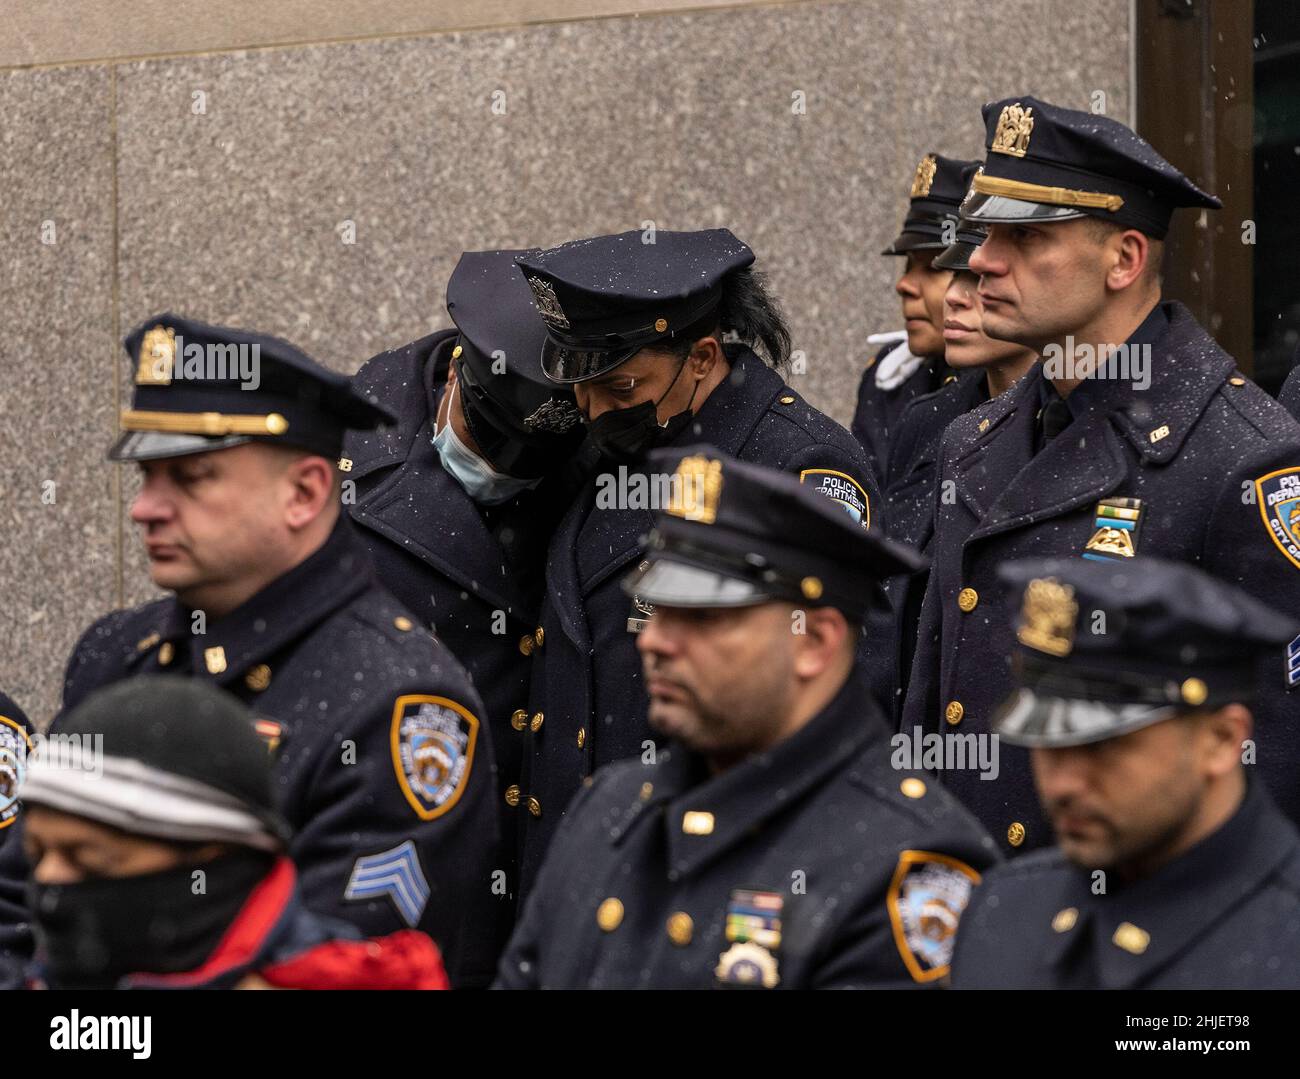 New York, United States. 28th Jan, 2022. Thousands of police officers gathered inside and outside St. Patrick's Cathedral for Jason Rivera funeral. The 22-year-old Rivera was killed when he and fellow NYPD officer, Wilbert Mora, responded to a domestic incident in Harlem on January 21. Rivera was posthumously promoted Friday from officer to detective first-grade. (Photo by Lev Radin/Pacific Press) Credit: Pacific Press Media Production Corp./Alamy Live News Stock Photo